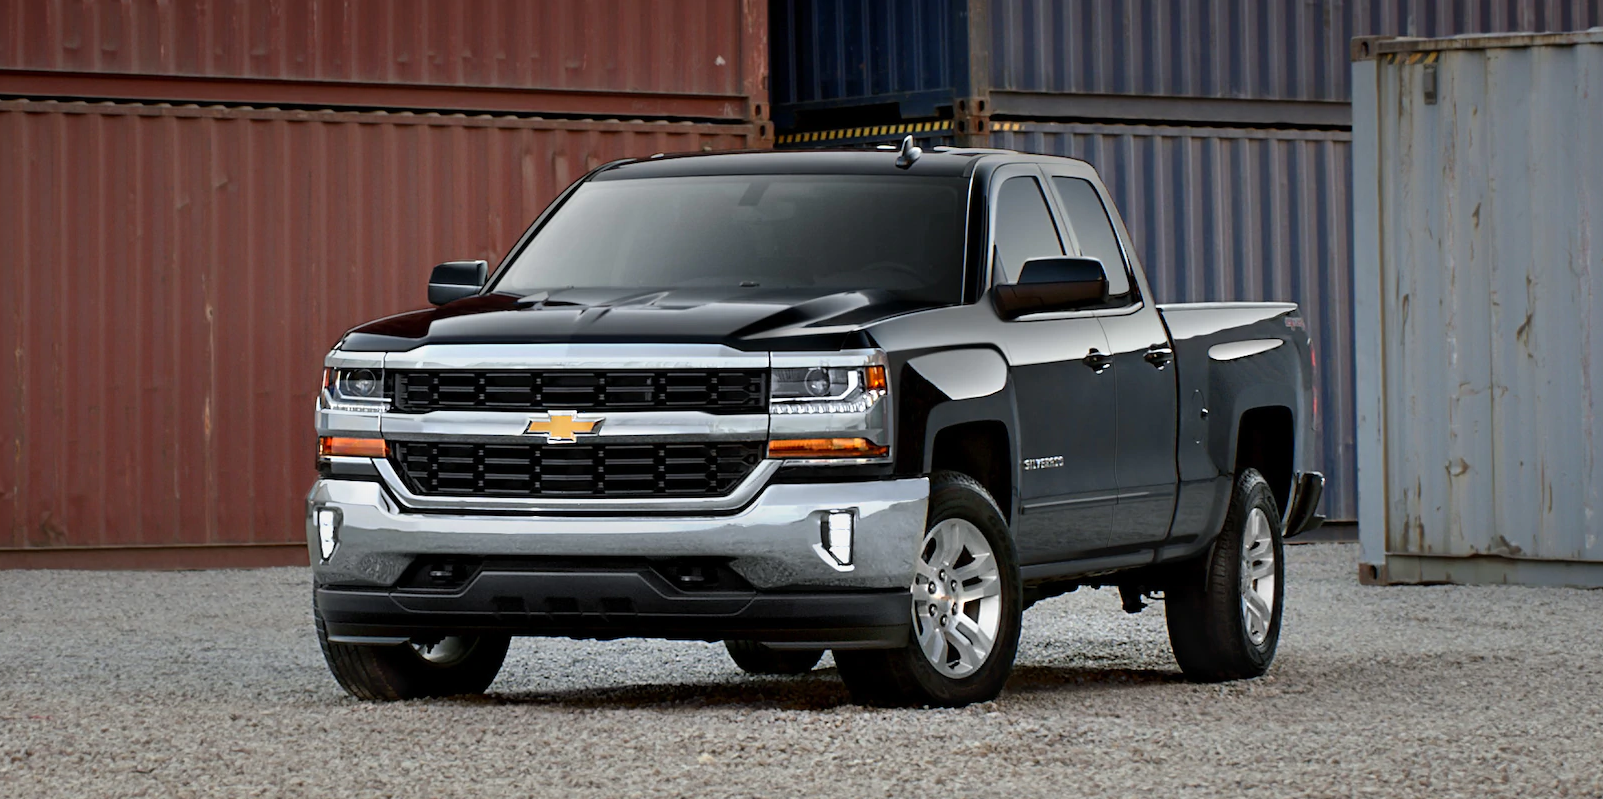 Chevy Silverado 2019 Monthly Payment